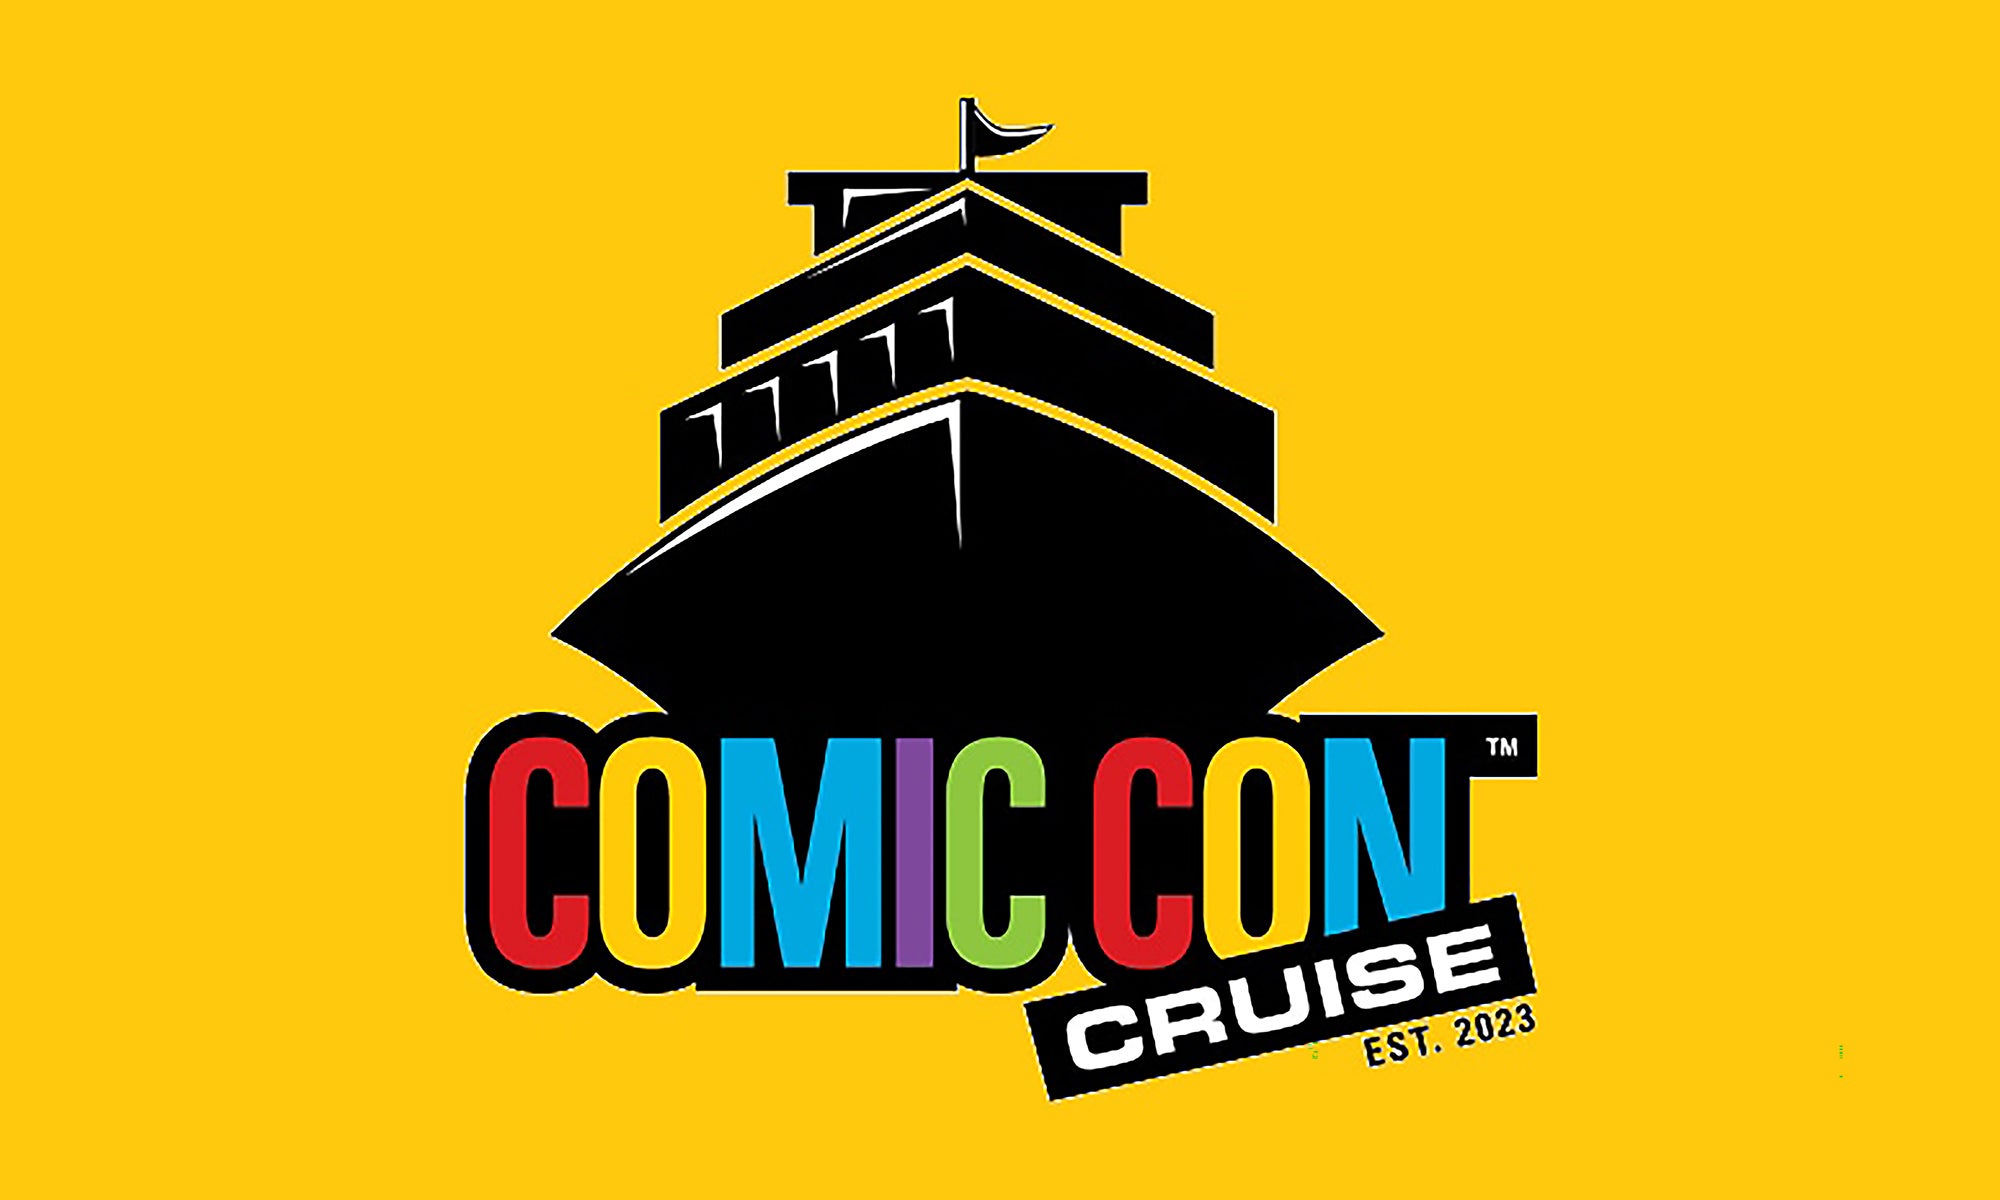 Comic-Con: The Cruise to set sail in 2025